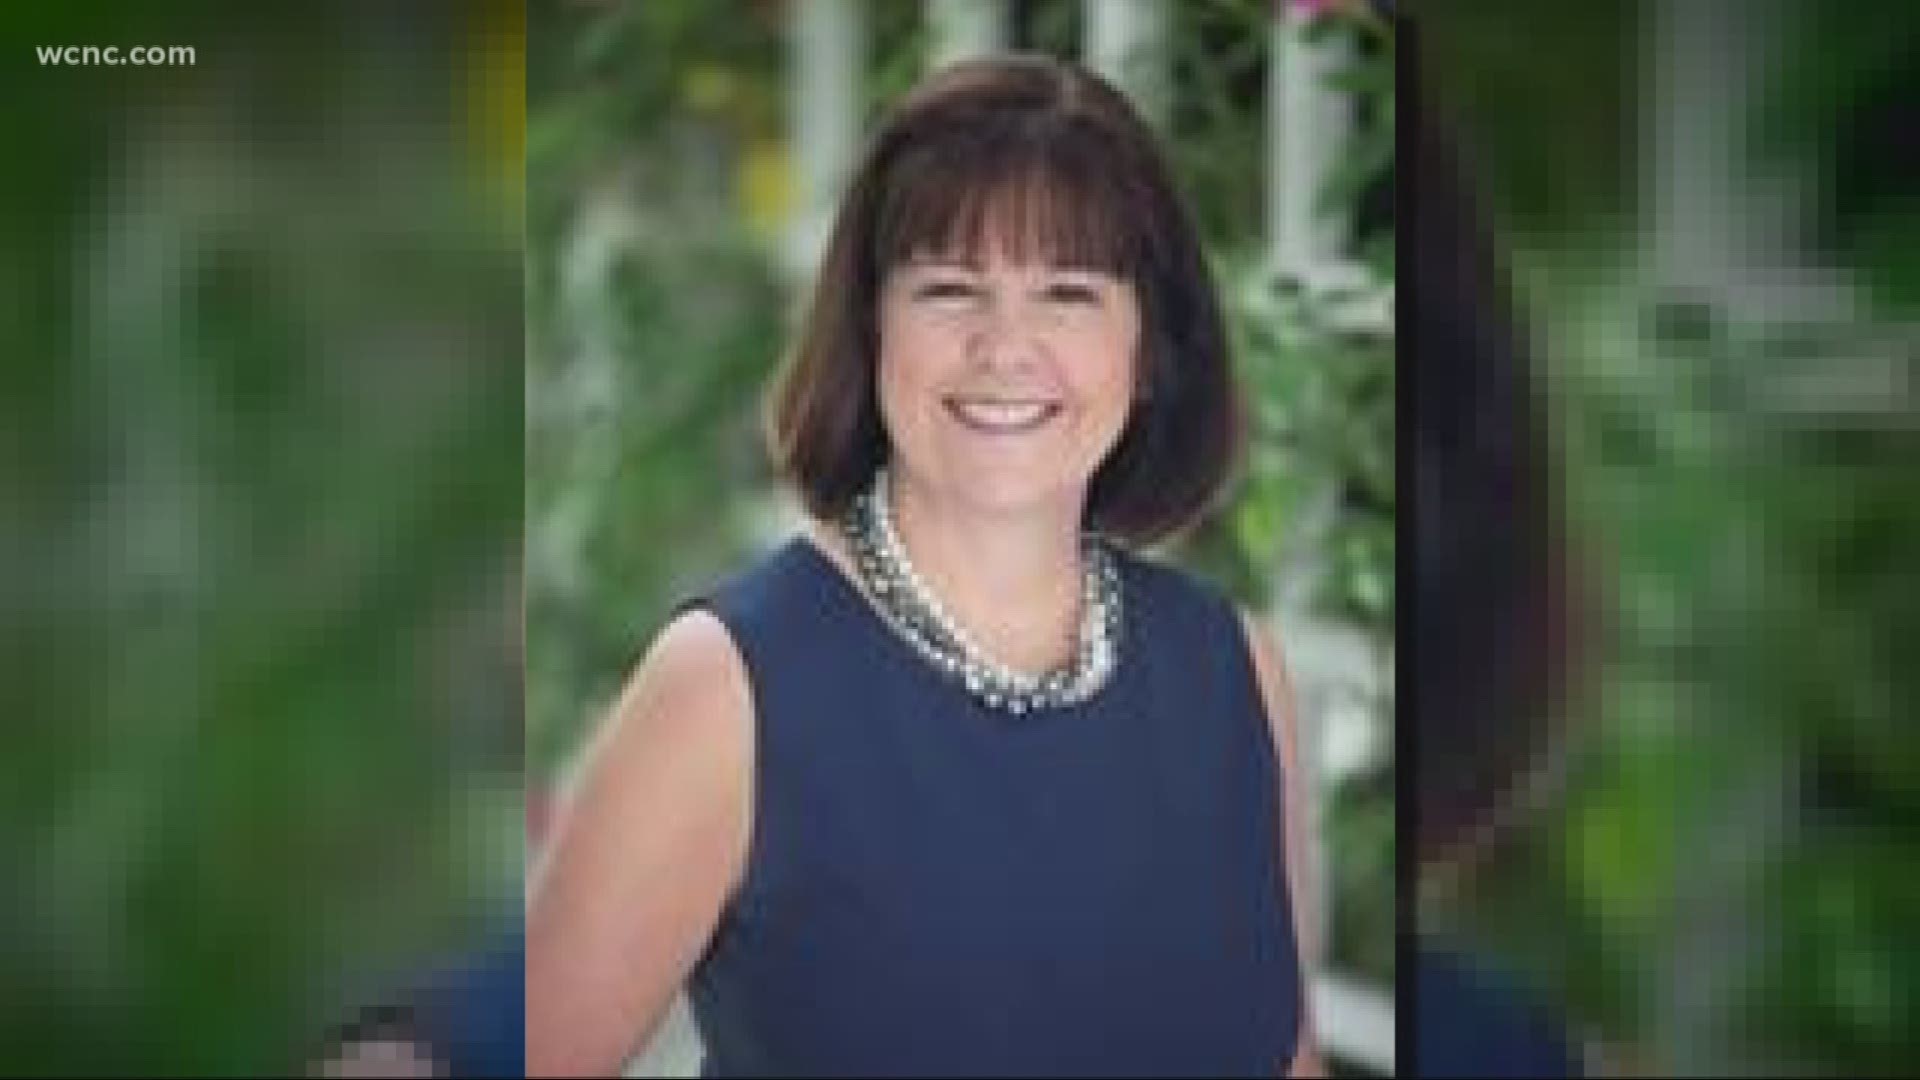 Vice President Mike Pence's wife, Karen, is making a trip to the Queen City Monday to show support for GOP congressional candidate Mark Harris.